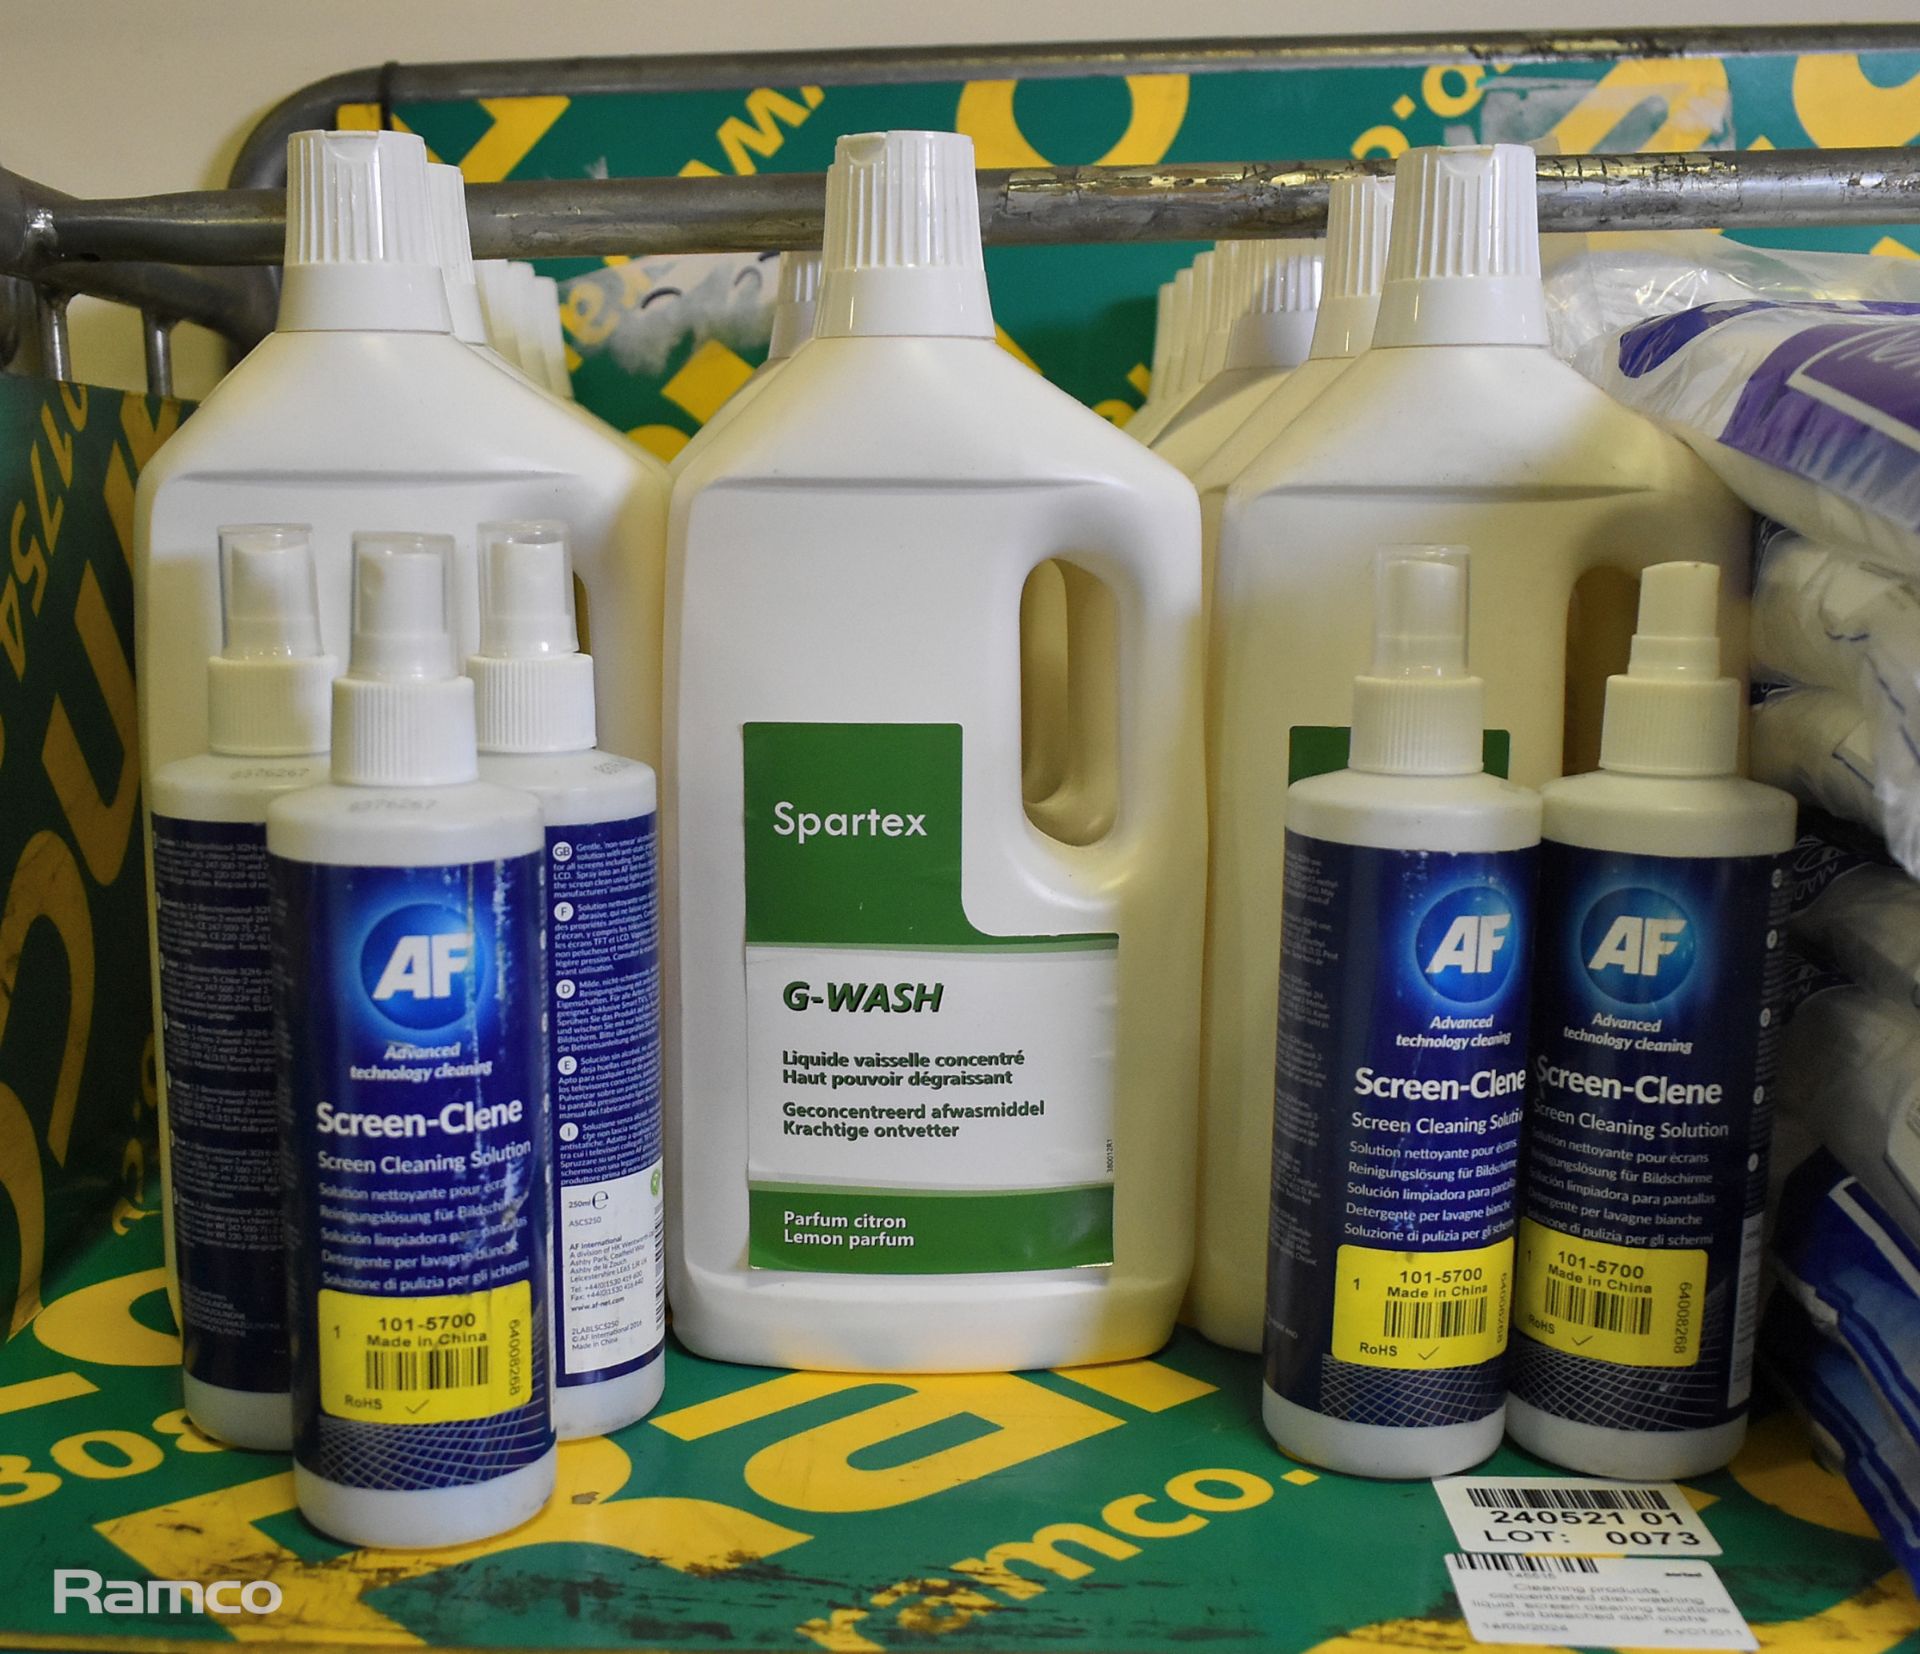 Cleaning products - concentrated dishwashing liquid, screen cleaning solutions and bleached cloths - Image 2 of 12